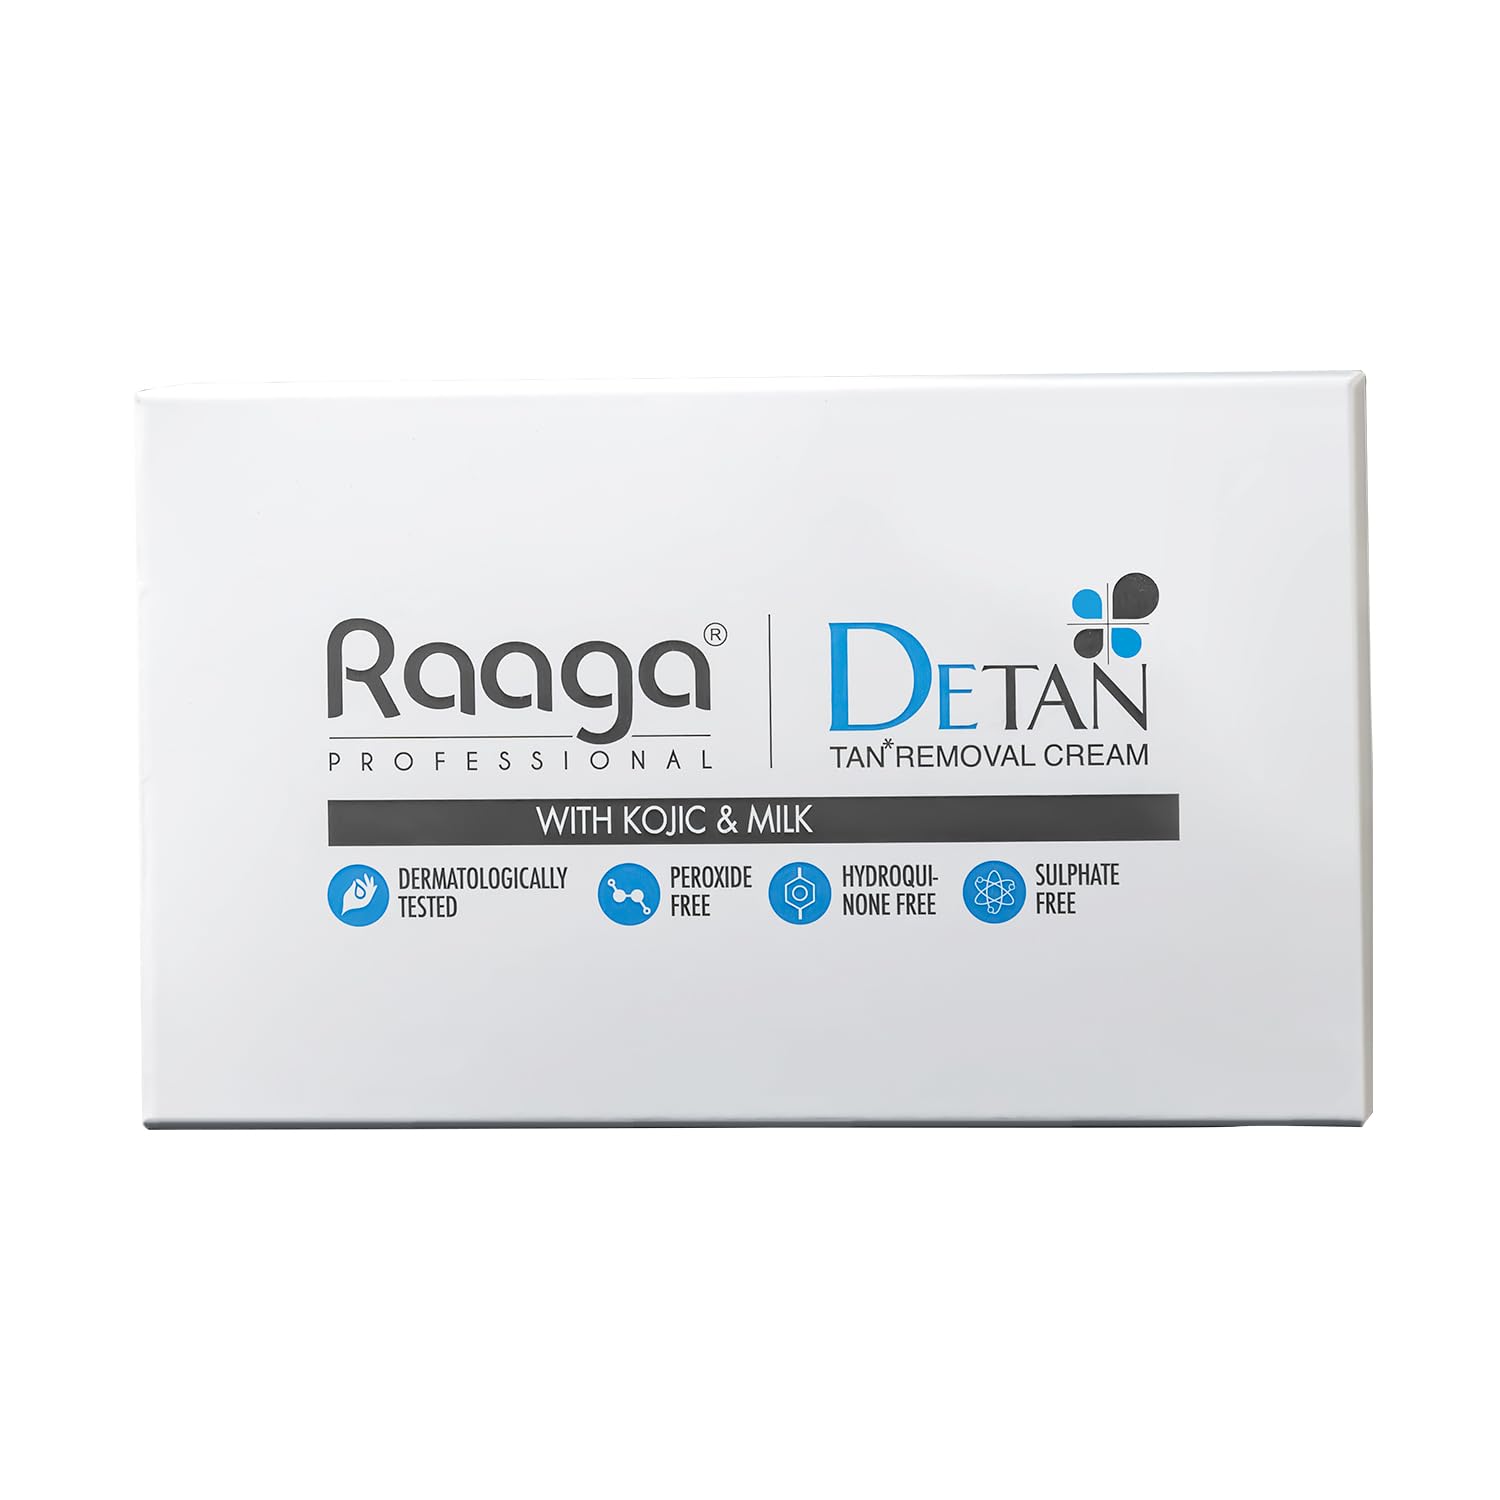 Raaga Professional De-Tan Pack | Tan Removal Cream with Kojic and Milk | Dermatologically Tested, Peroxide Free, Hydroquinone Free, Sulphate Free - 12g x 6 (72 gm)  from Raaga Professional